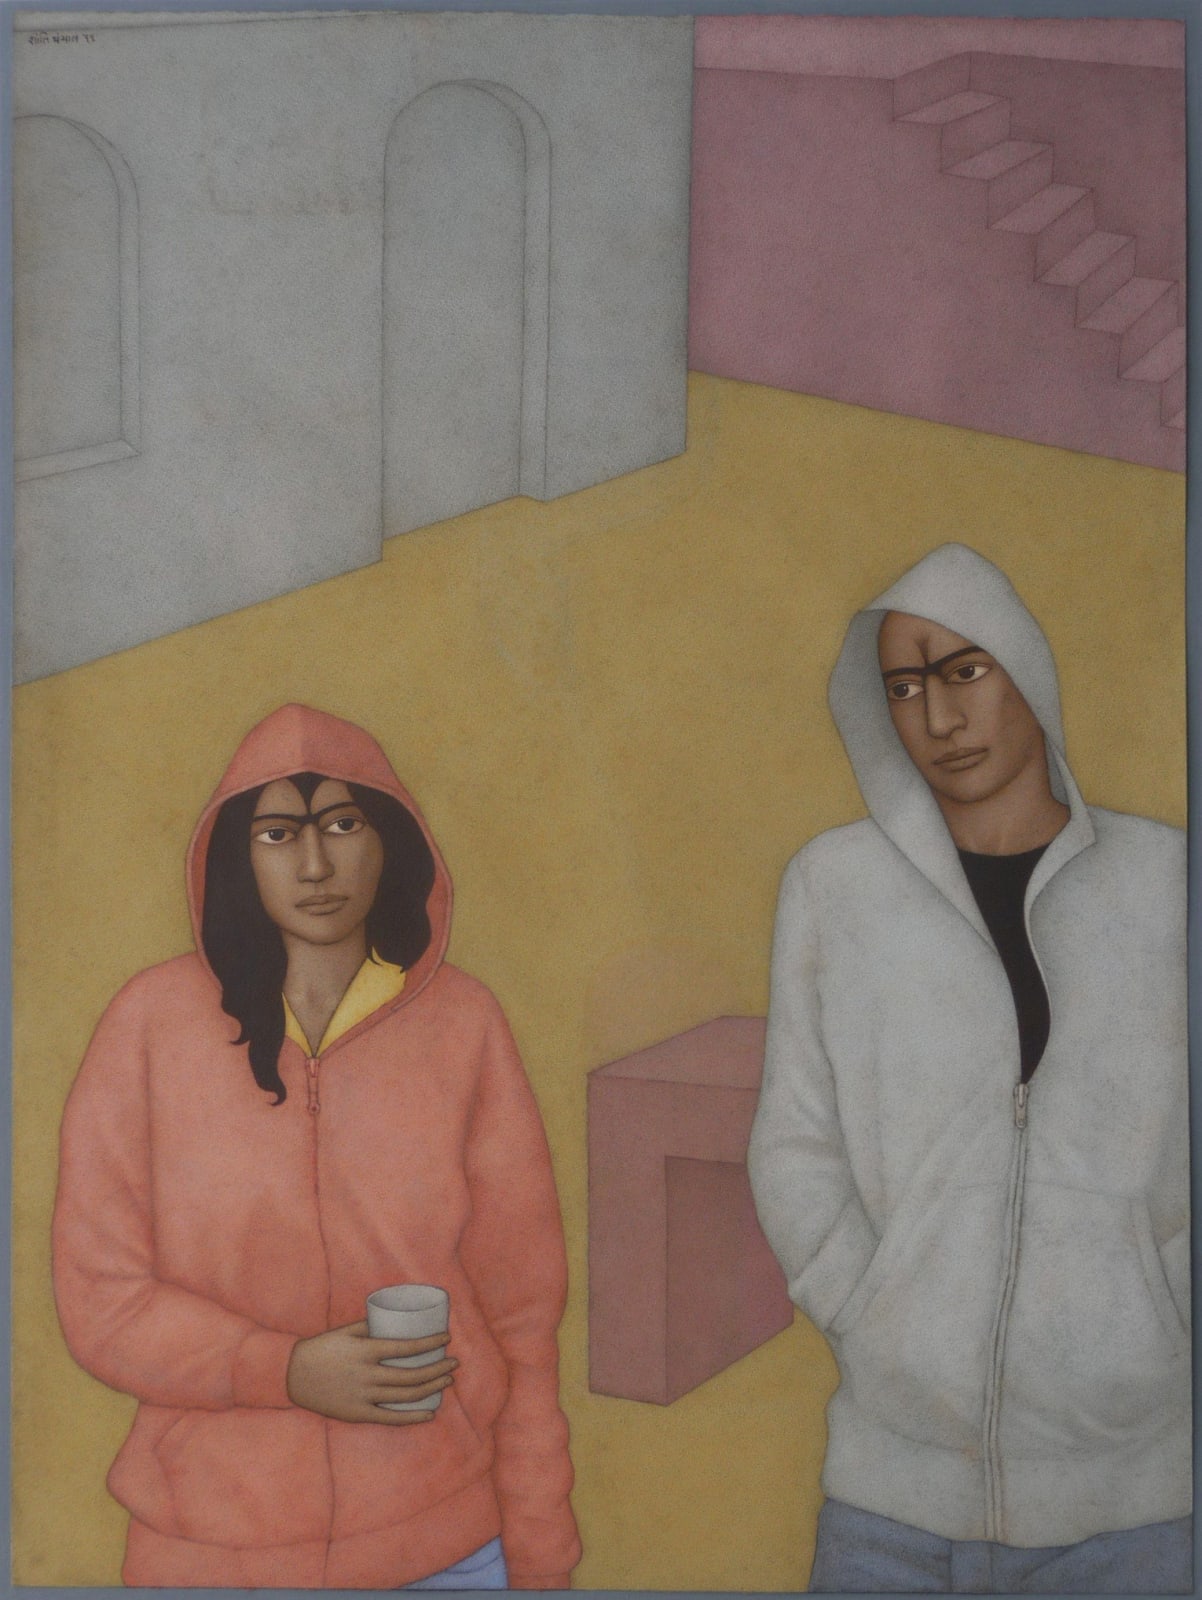 Shanti Panchal, Hoodies in the Square, 2011